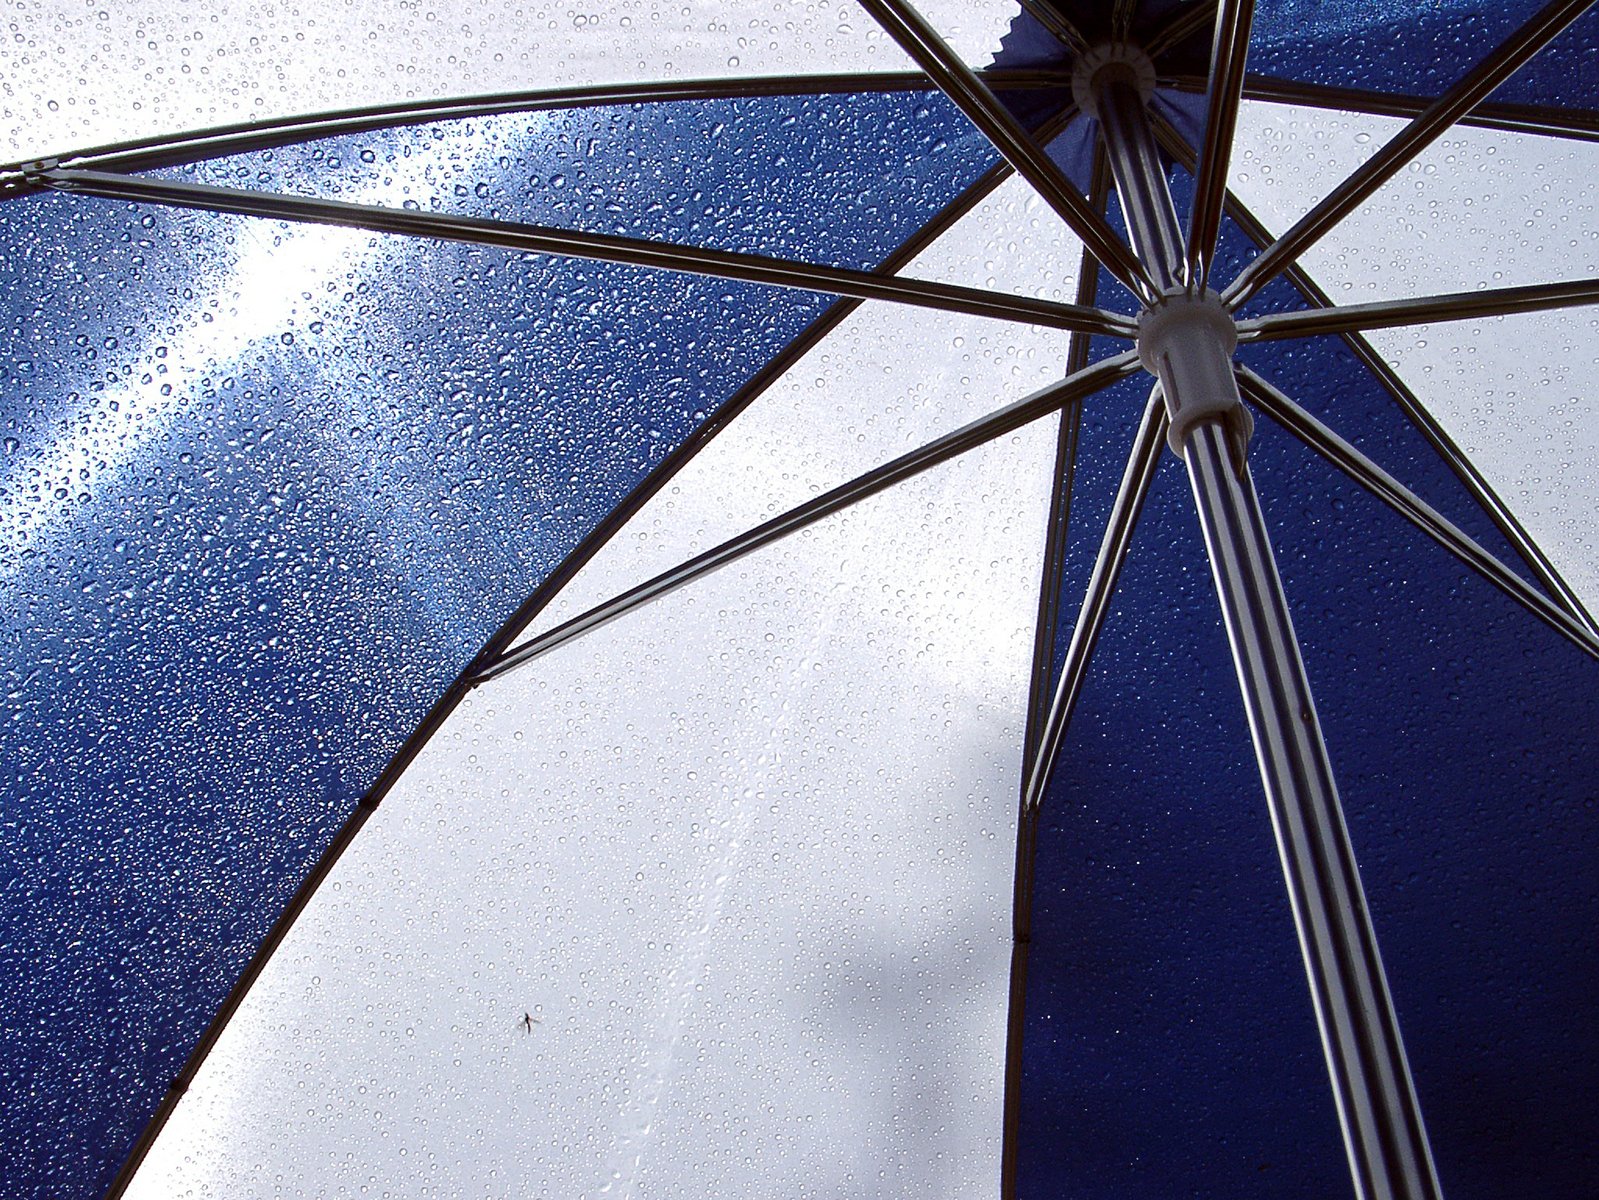 blue and white umbrella with small splashes of water